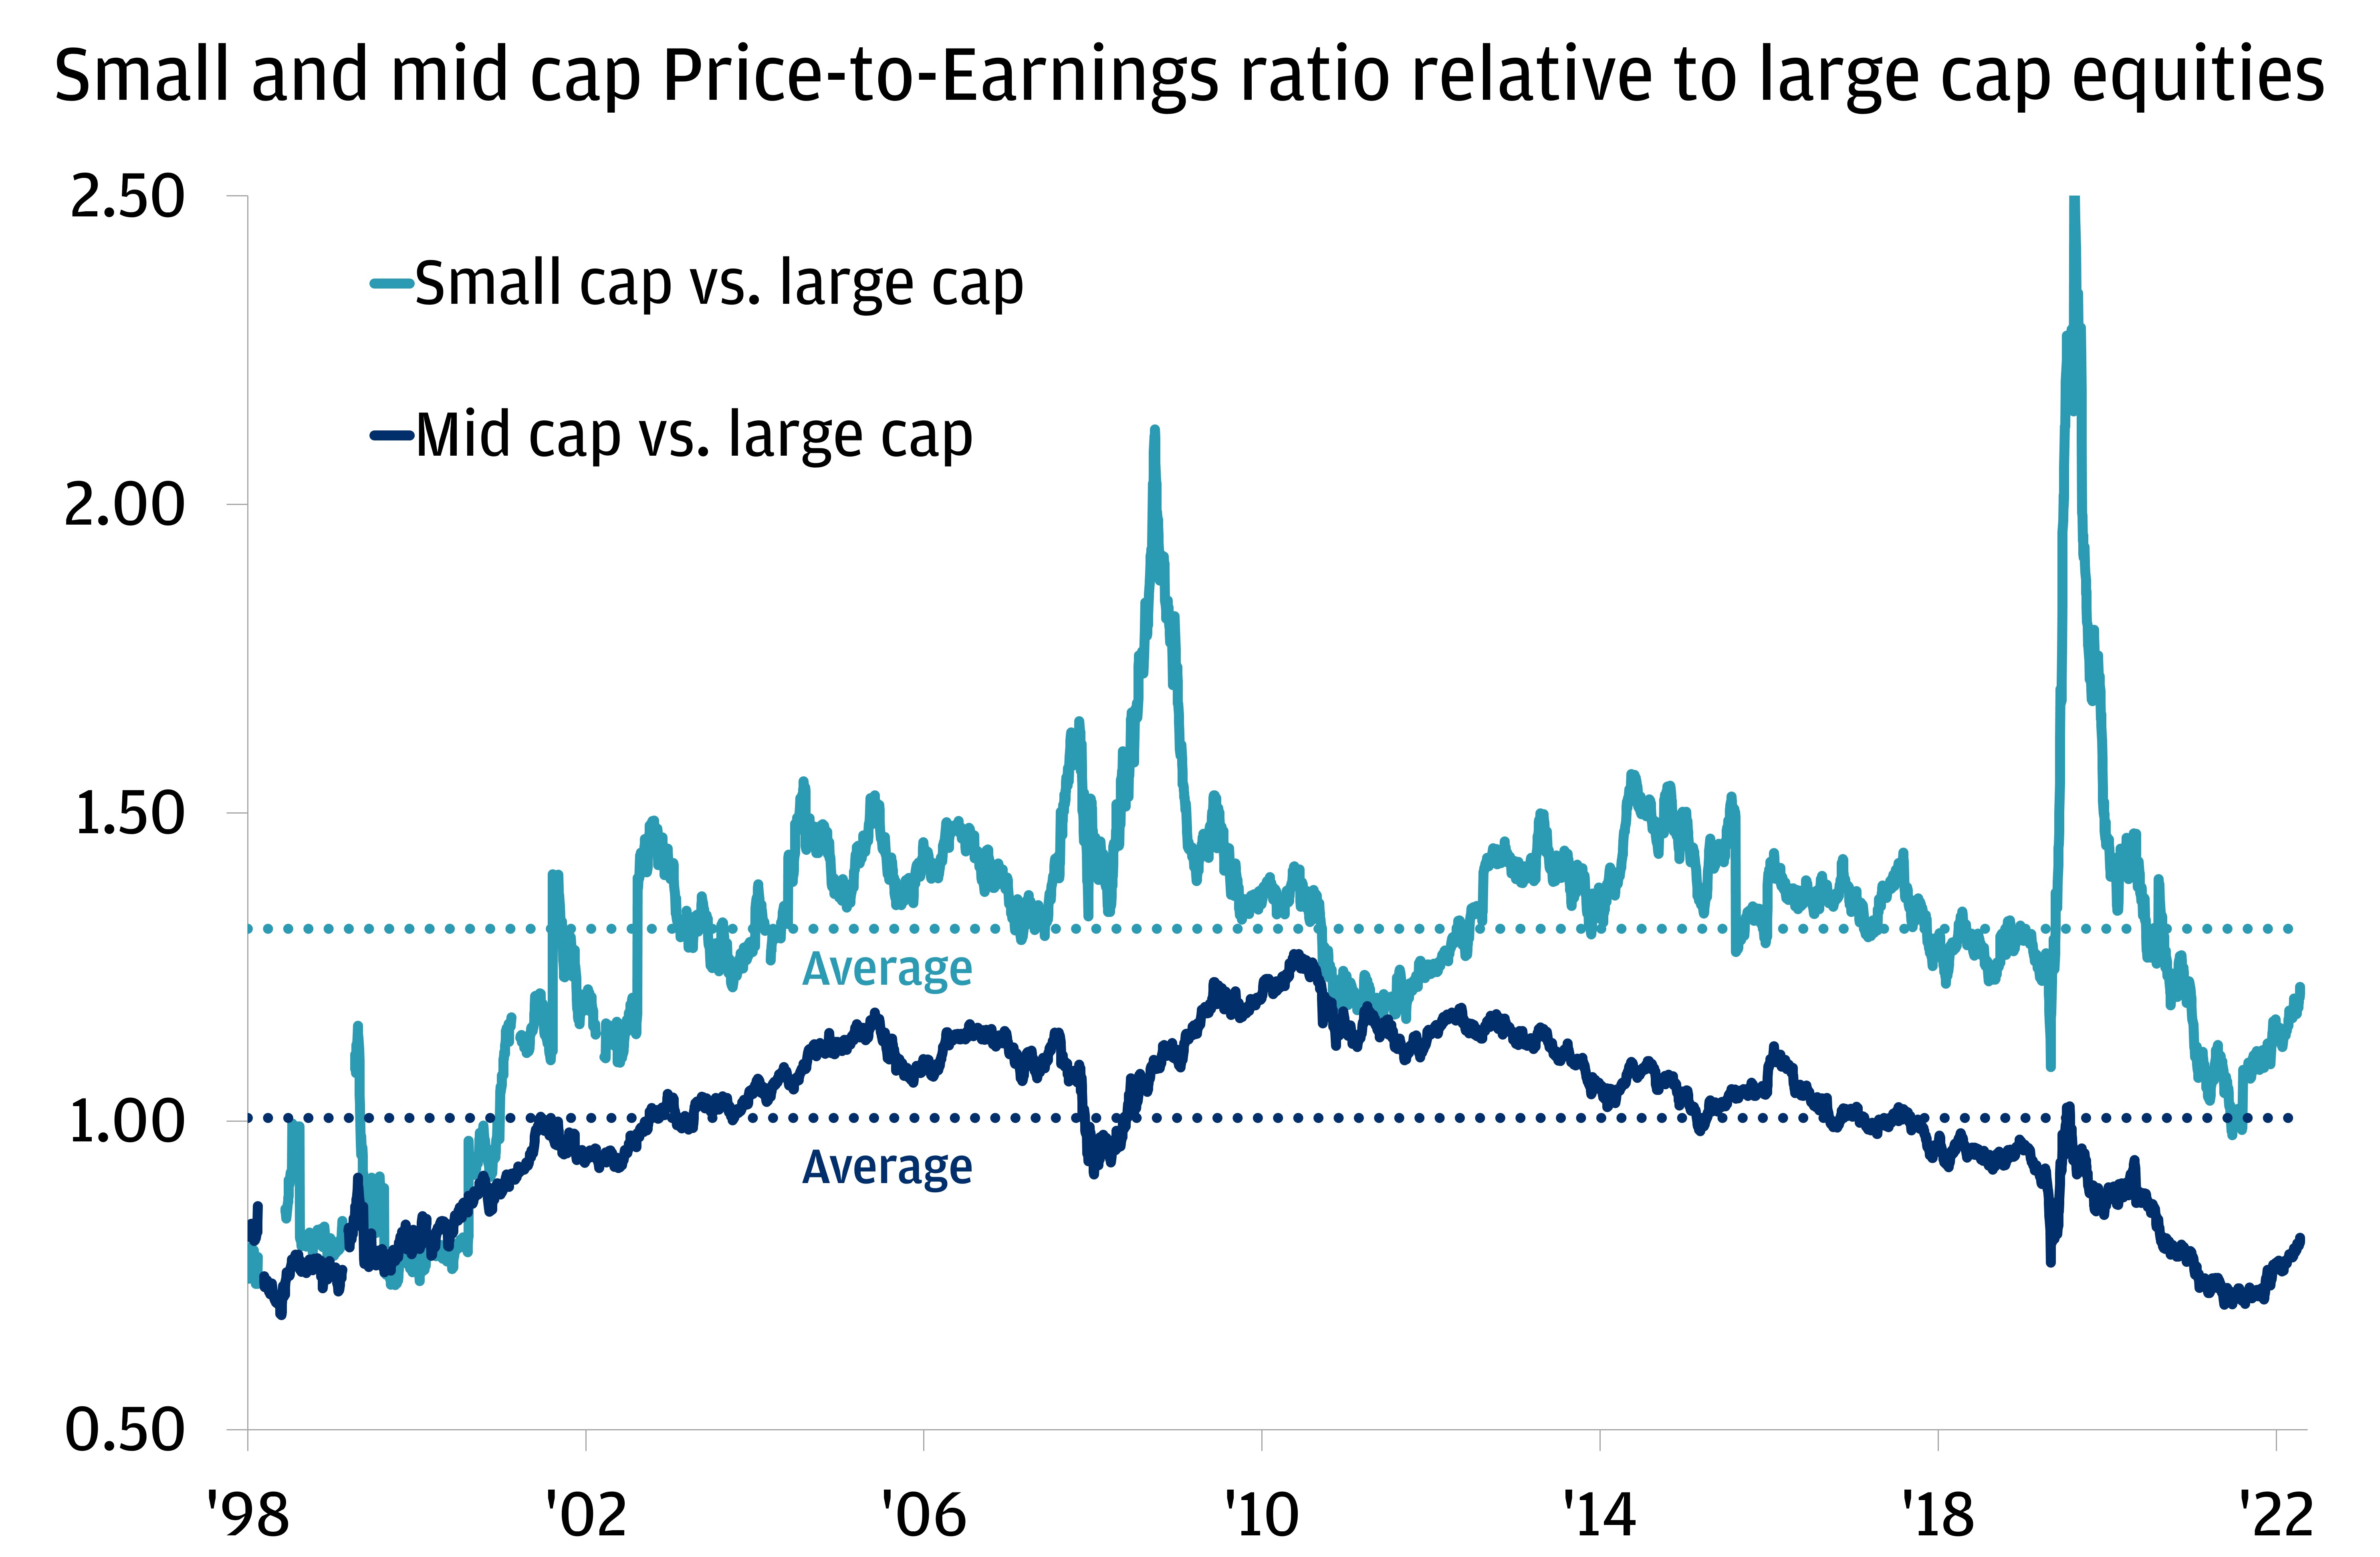 This chart shows small- and mid-cap price-to-earnings ratios relative to large-cap equities from 1998 to 2023. Small caps began at 0.75, and rose to 1.4 by July 2002 and 2.1 by August 2009. They then dipped back to 1.1 by November 2012 and rose to 1.6 by April 2015. They fell to 1.1 again by March 2020 before spiking above 2.5 by July 2020. They then fell back to 1 by May 2022 and rose to 1.2 by March 2023. The average over that time period was 1.3. Meanwhile, mid caps also began at 0.75 and rose steadily to 1.2 by May 2006. They then dipped to 0.9 by November 2008 and rose to 1.3 by May 2011. They steadily fell to 0.7 by May 2022 and rose to 0.8 by March 2023. The average over that time period was 1.